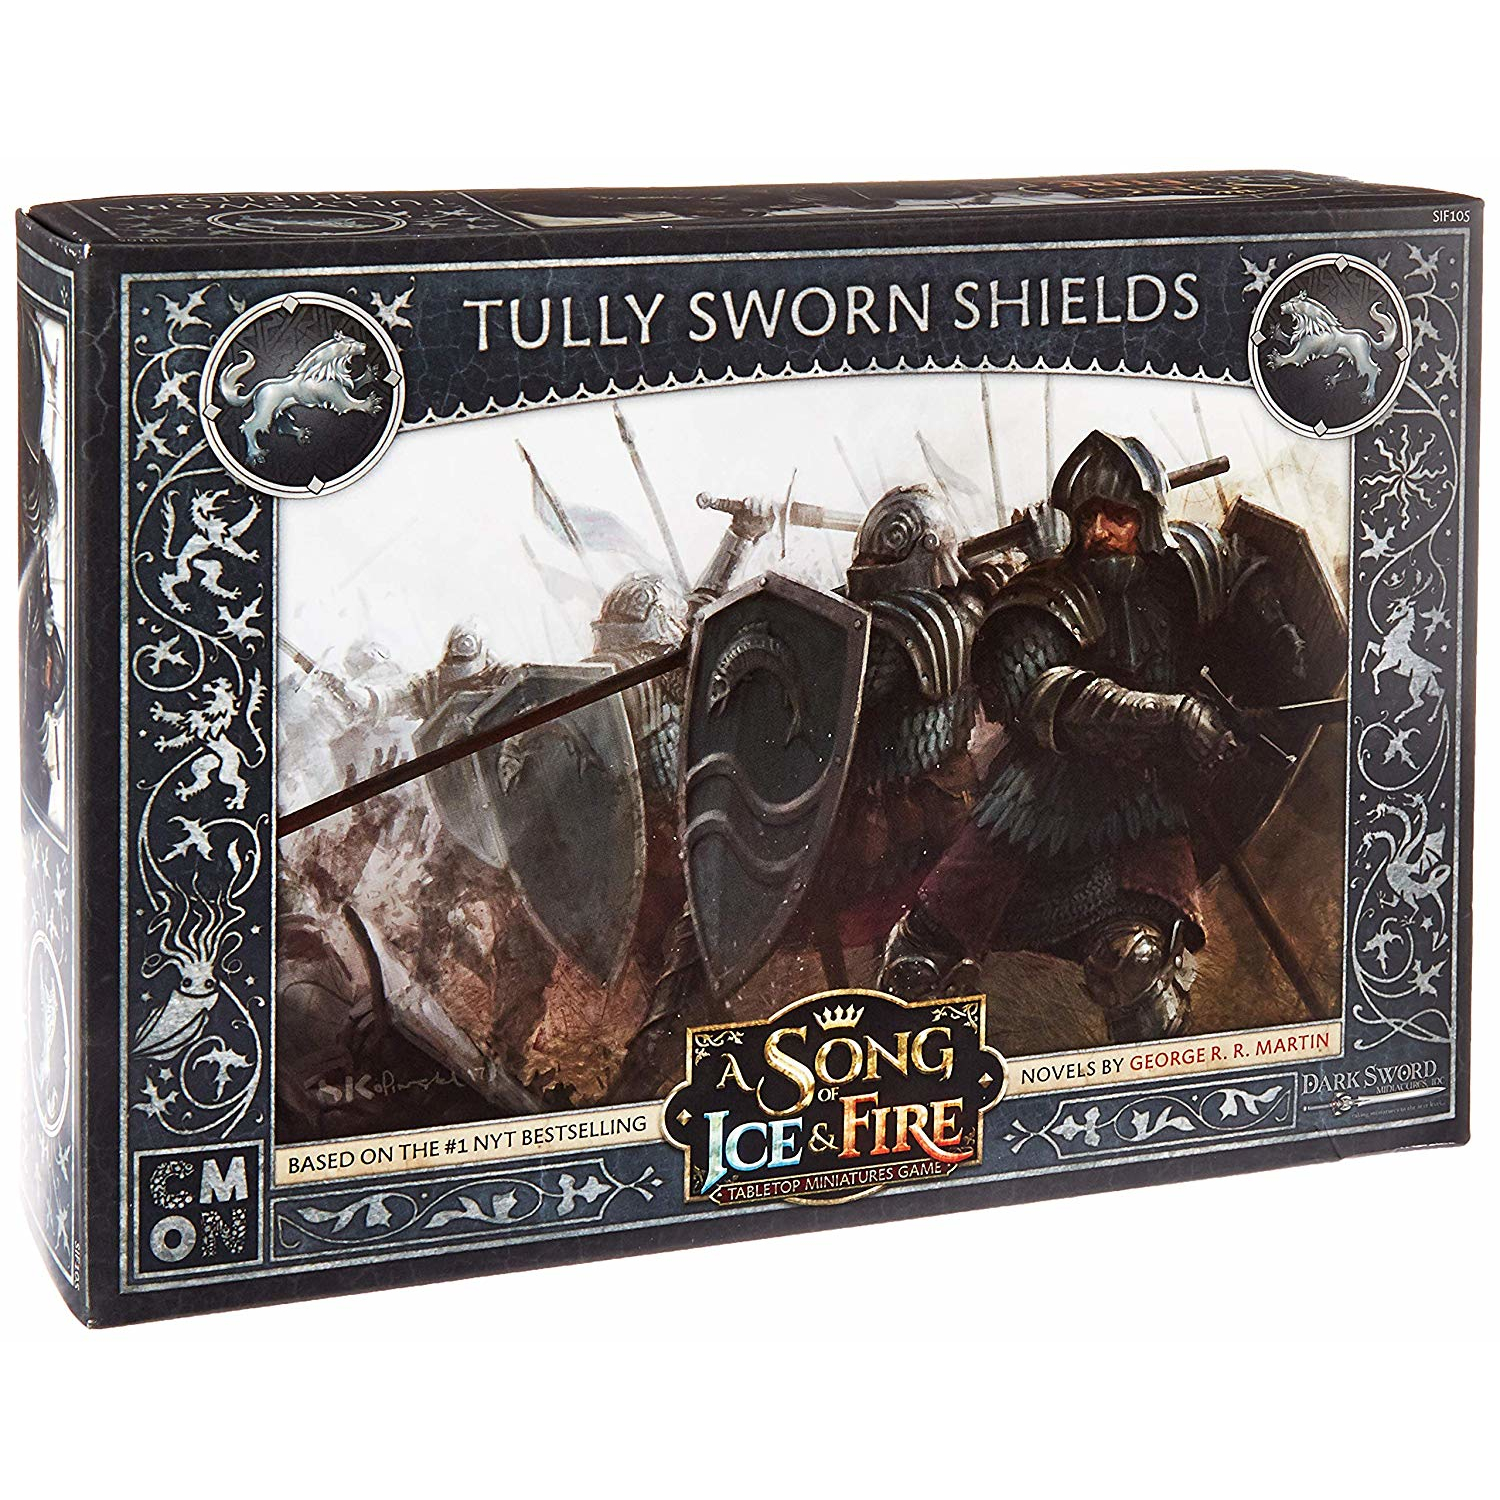 A Song of Ice & Fire: Tabletop Miniatures Game House Stark Tully Sworn Shields Unit Box, by CMON - image 1 of 6